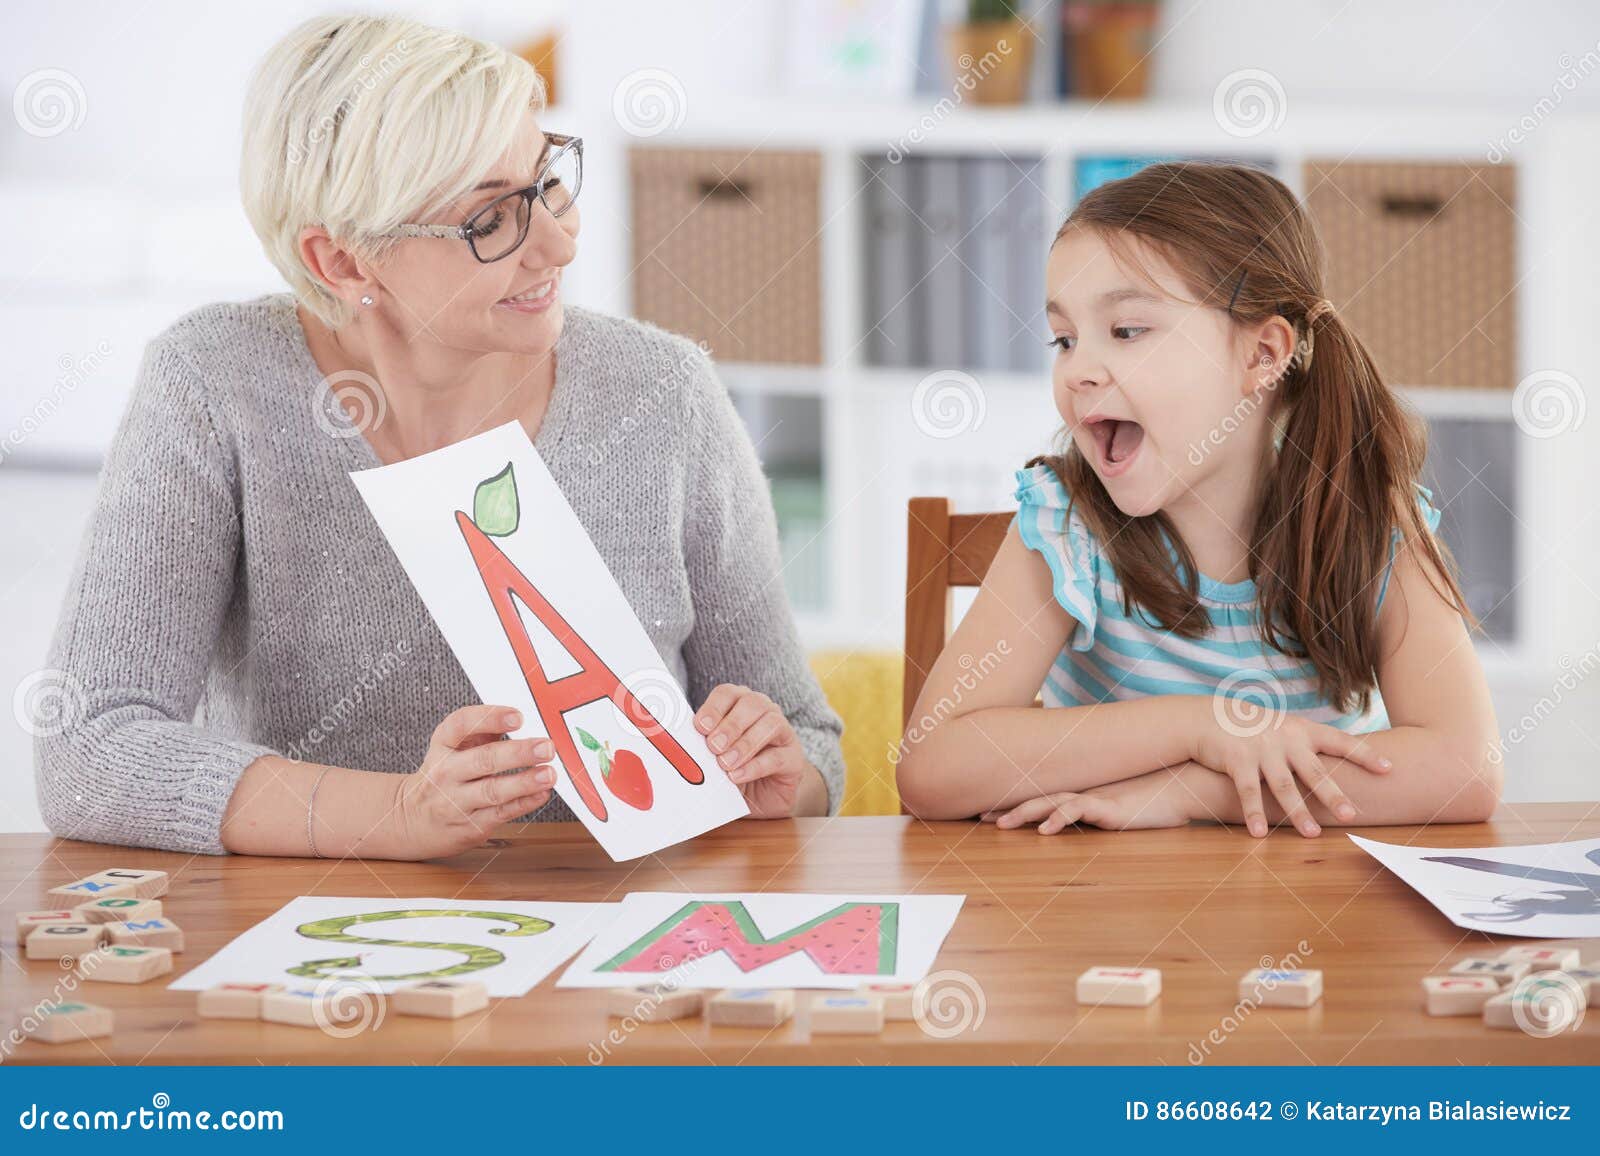 girl spelling letters with therapist